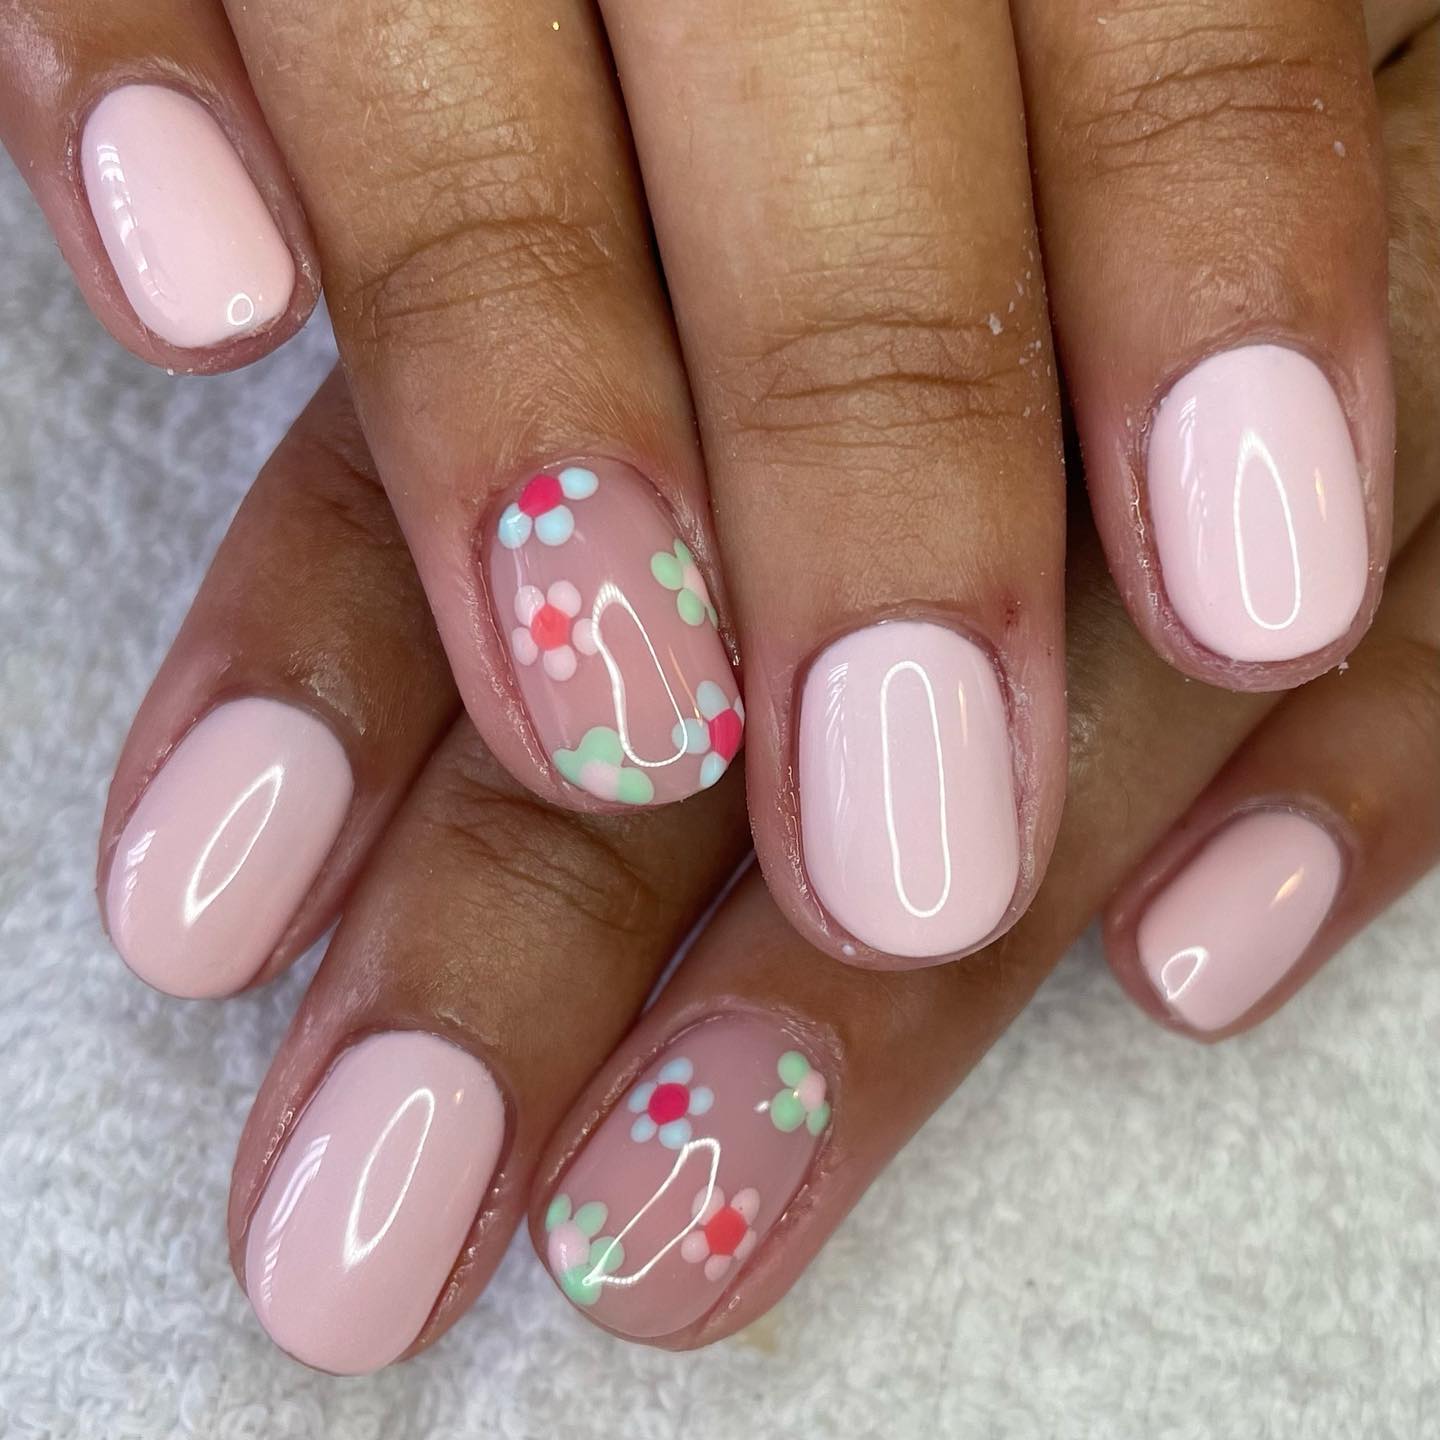 How pretty these daisy nails are! It gives the spring vibe to the fullest. Give it a shot if you like this color.